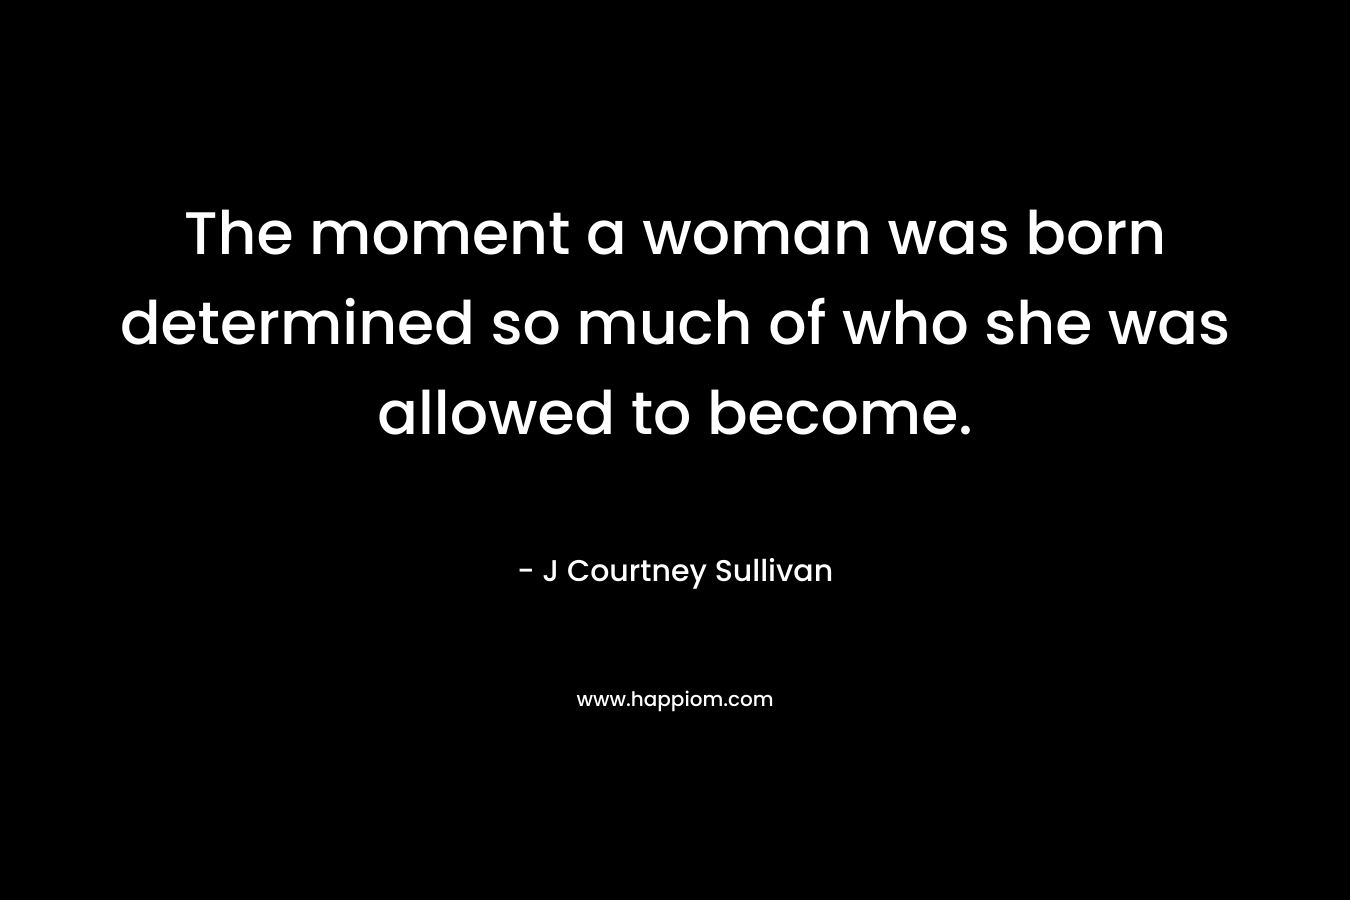 The moment a woman was born determined so much of who she was allowed to become.